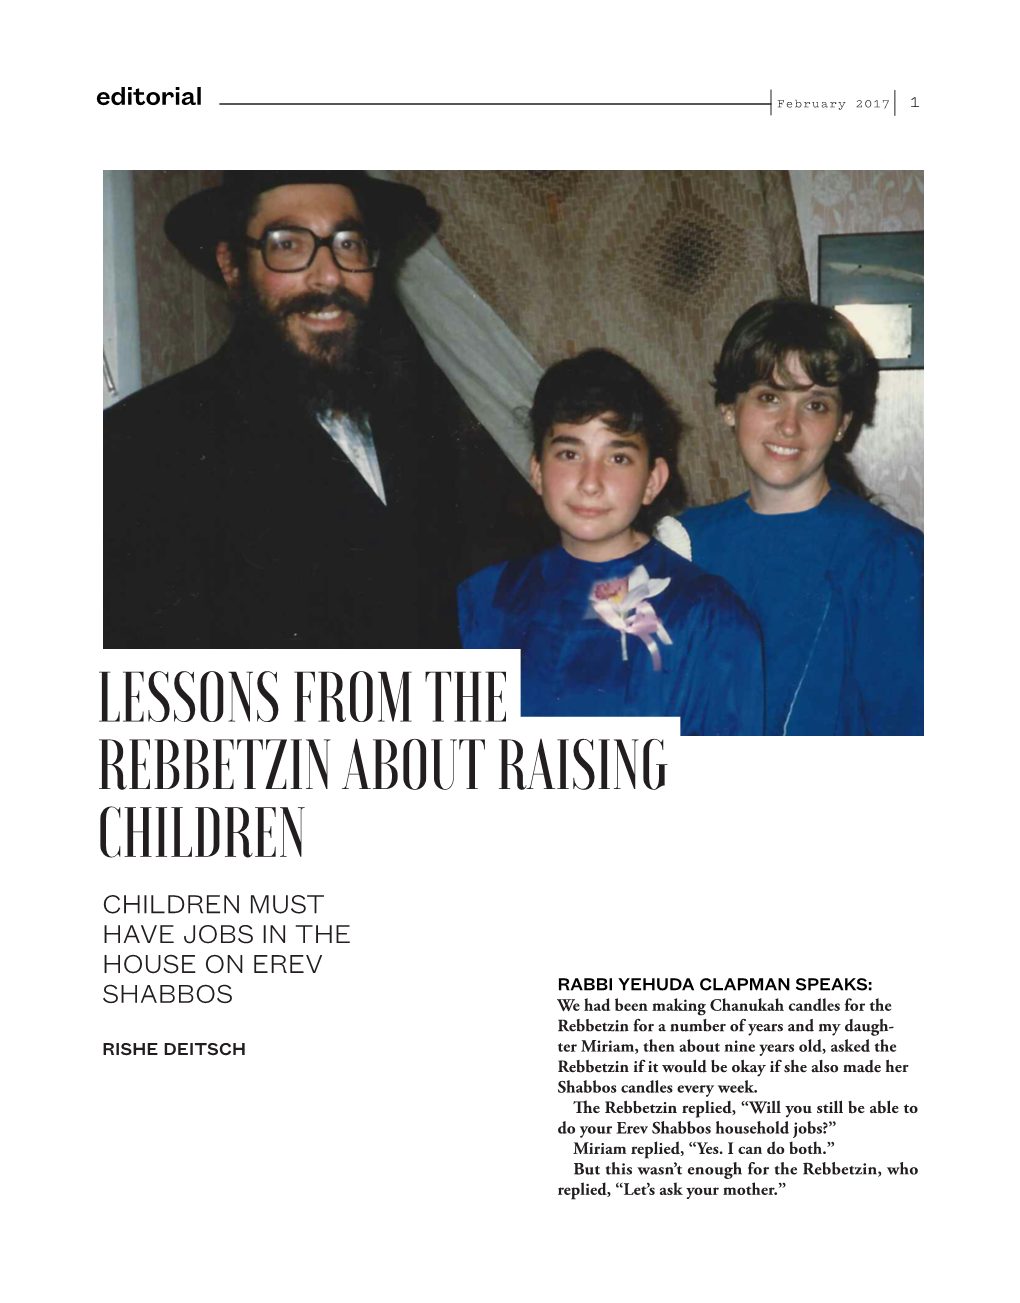 Lessons from the Rebbetzin About Raising Children